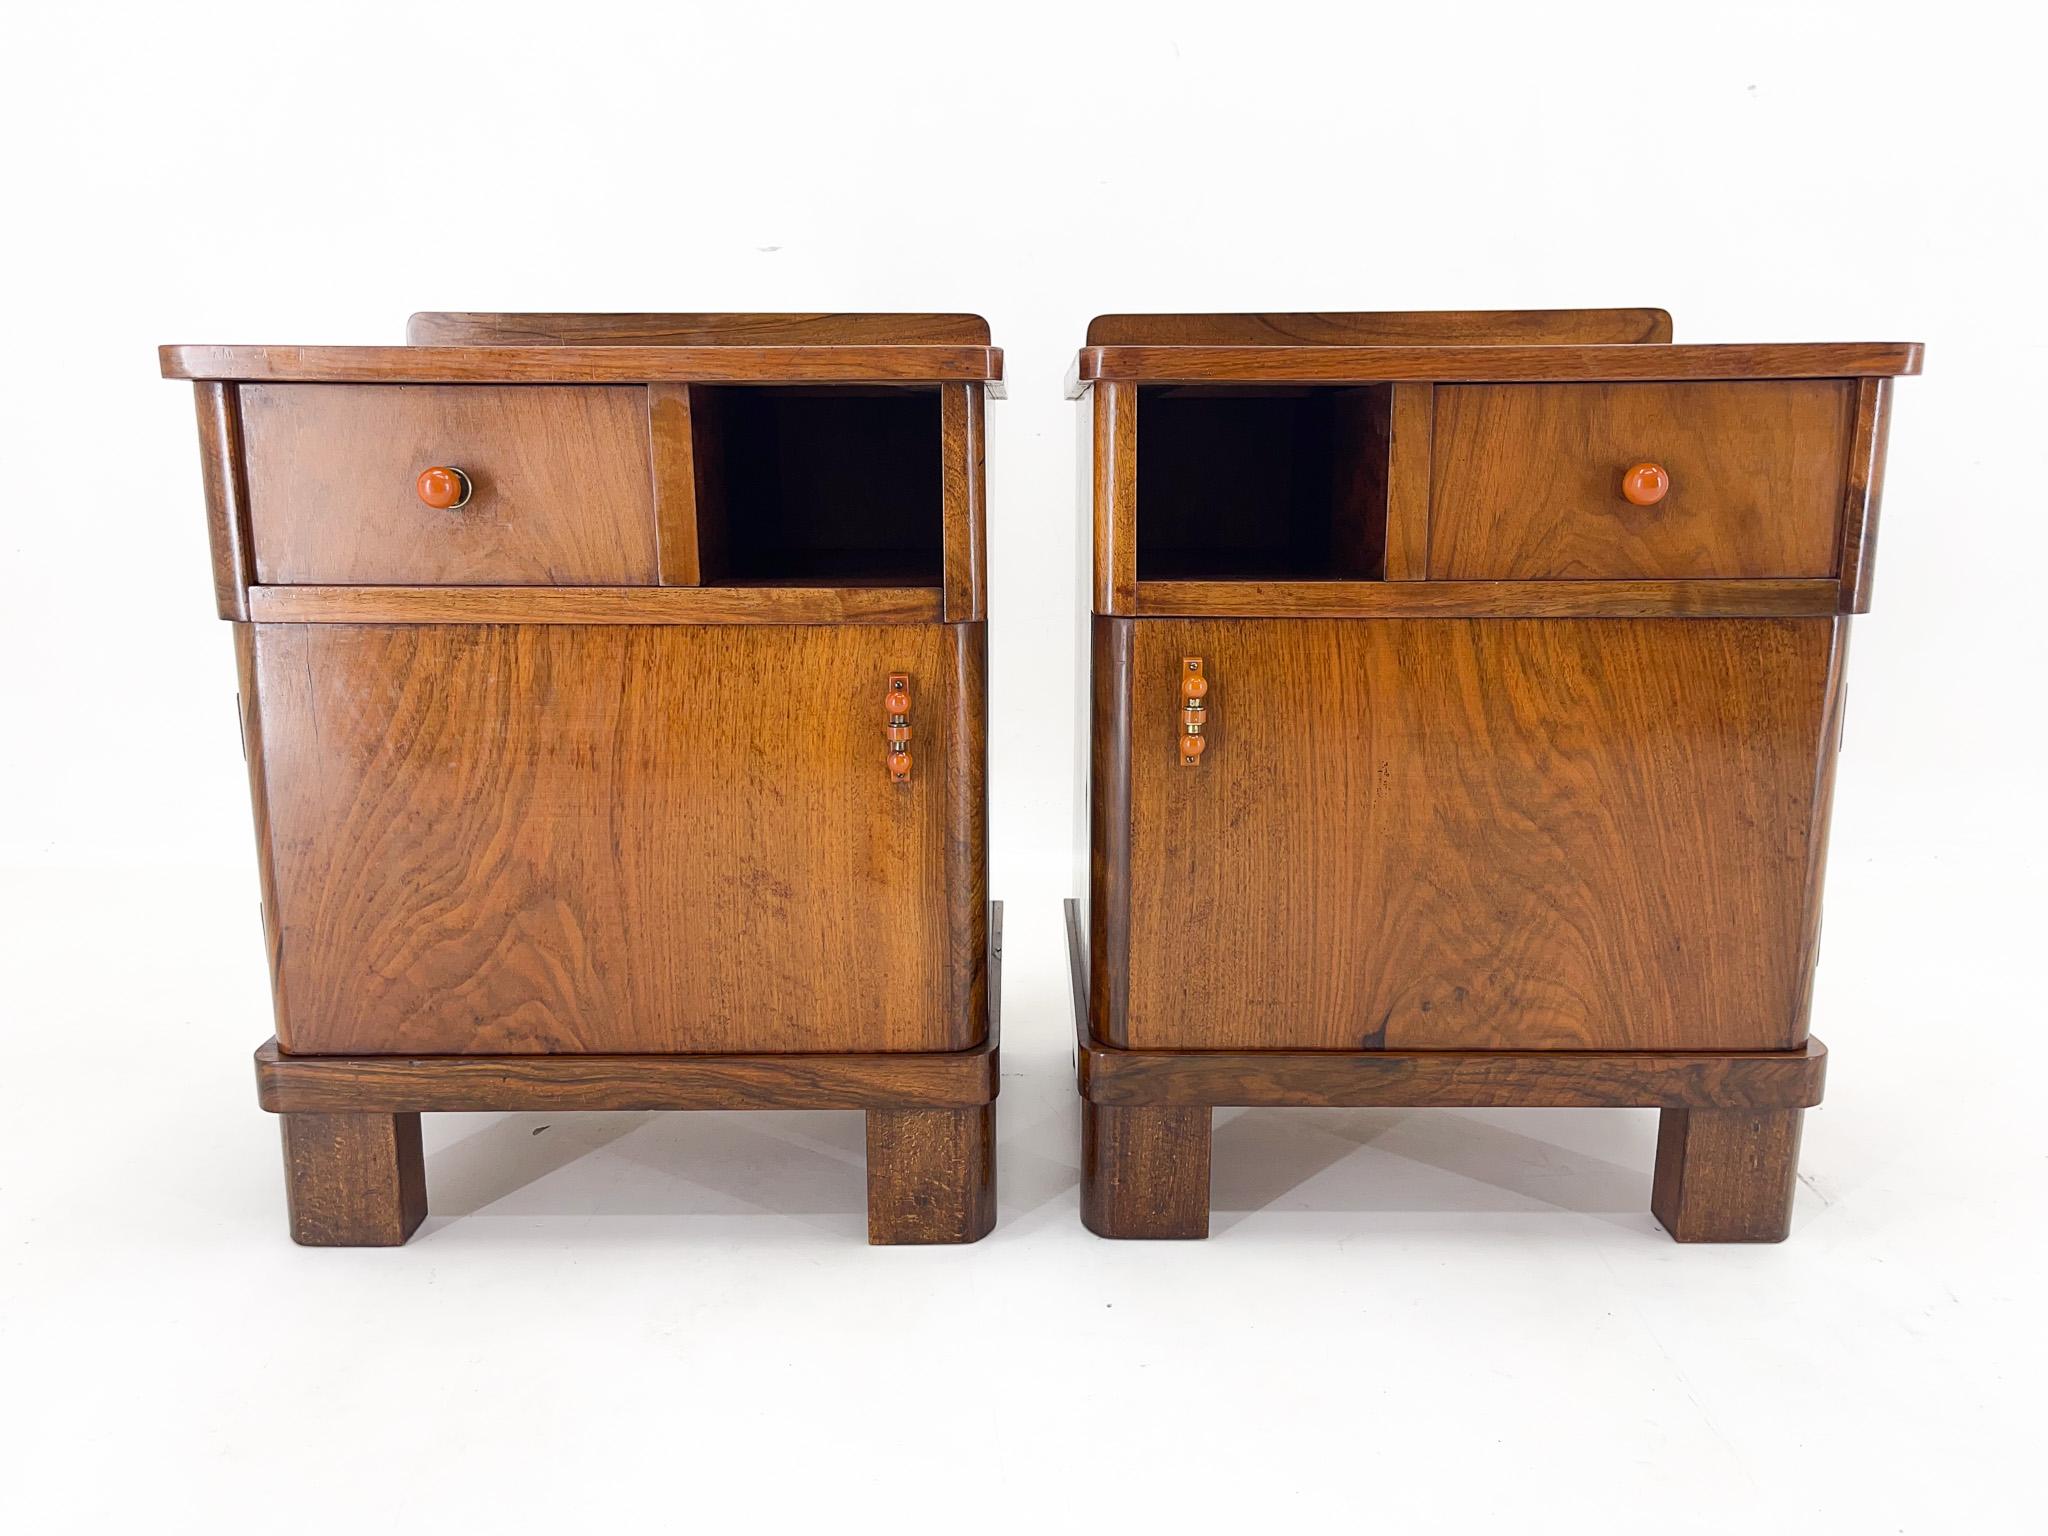 Set of two art deco night stands. Made of walnut, produced in former Czechoslovakia. Good original condition with some signs of use (see photo).